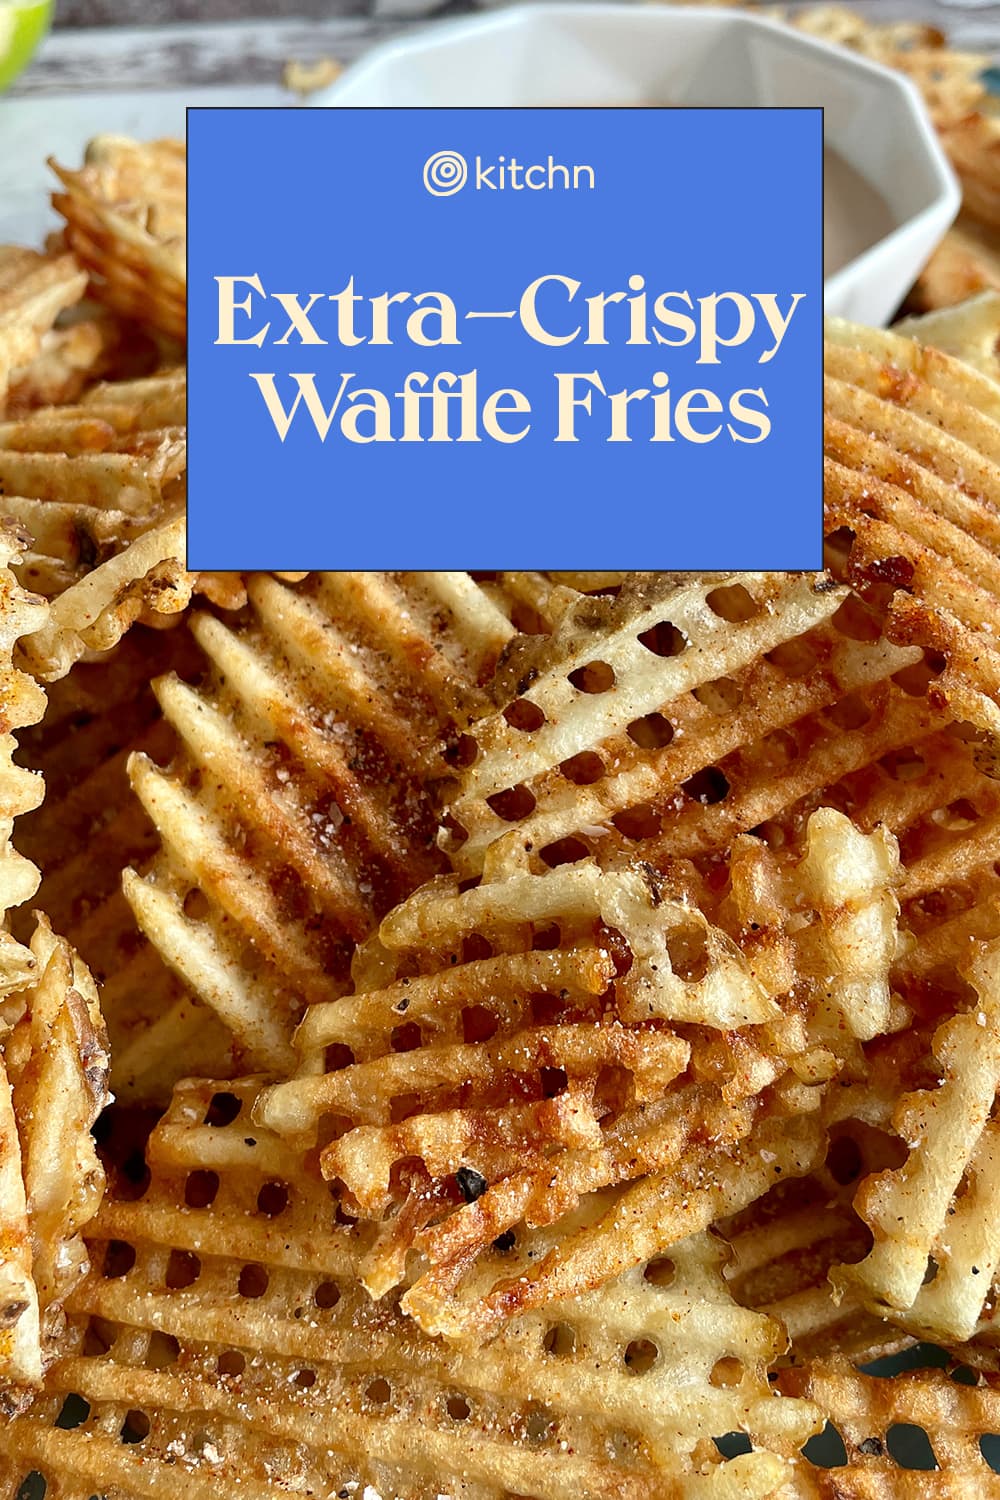 How to make waffle fries from: budget101.com